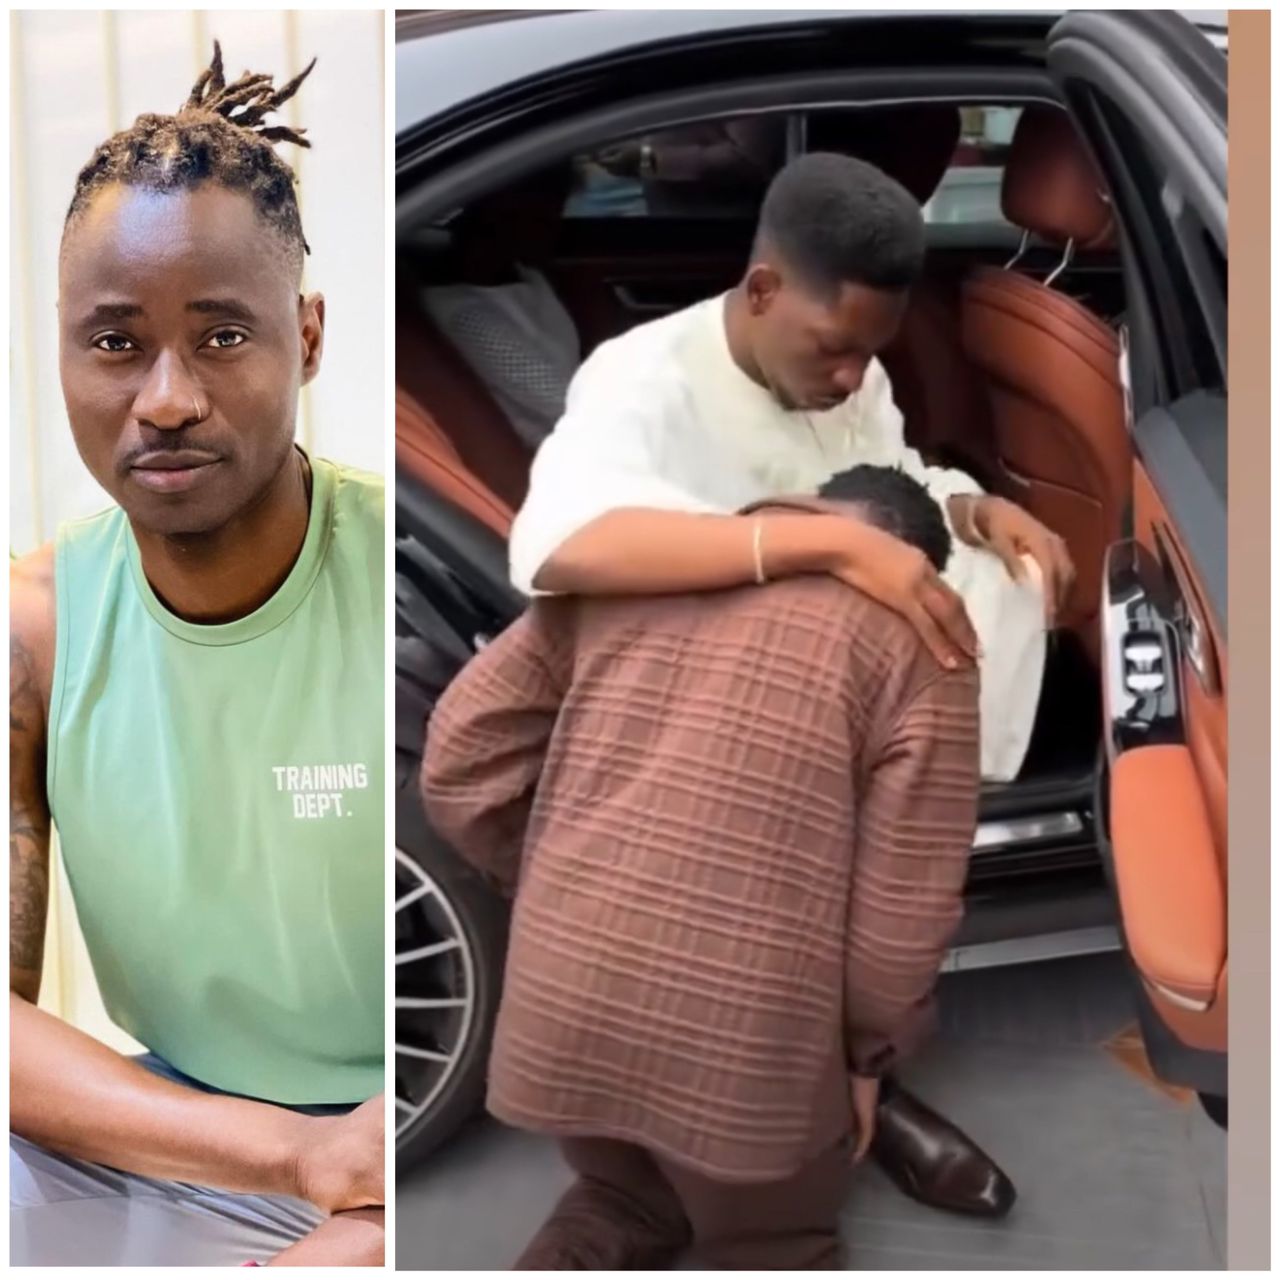 This is nothing but pure stupidity and idolatory - Gay rights activist, Bisi Alimi, reacts to video of upcoming singer kneeling and receiving prayers from gospel singer, Moses Bliss